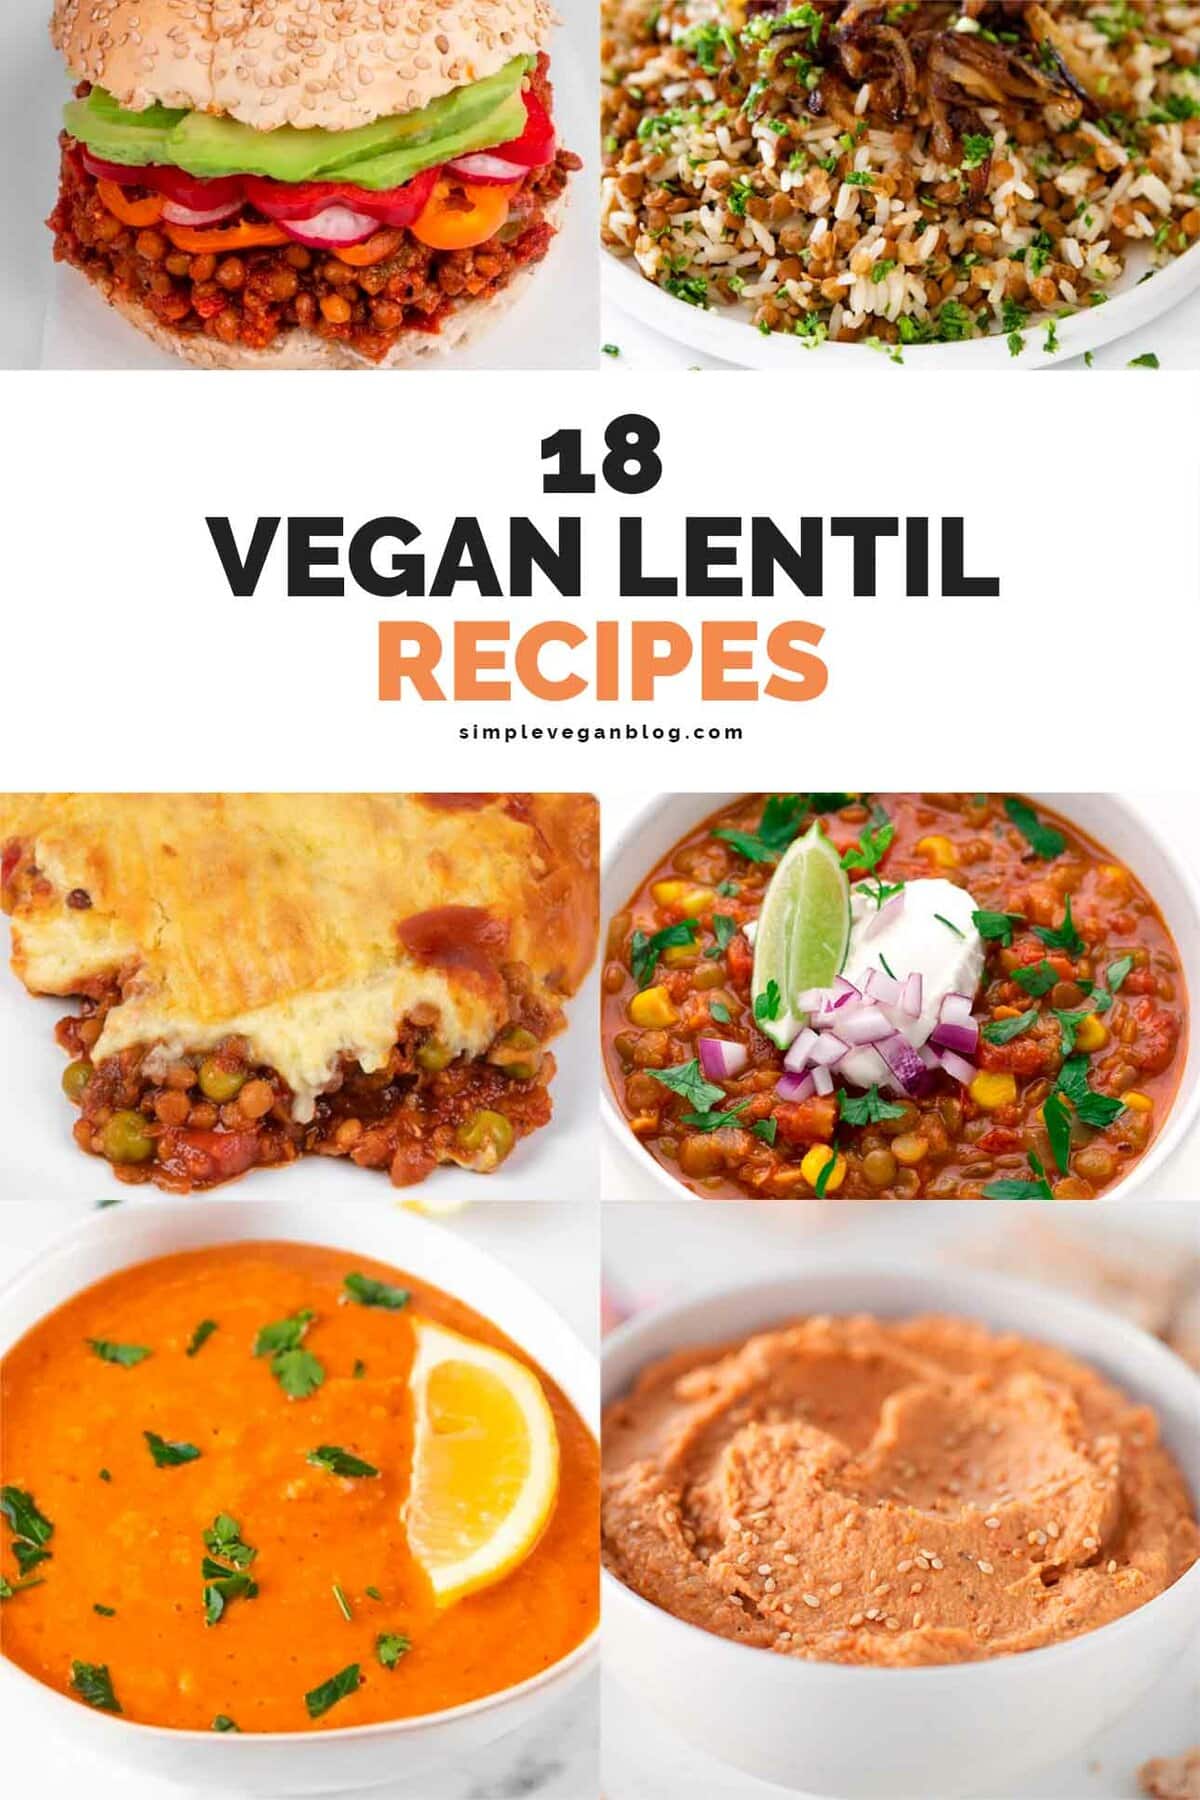 A collage of vegan lentil recipes pictures with a heading